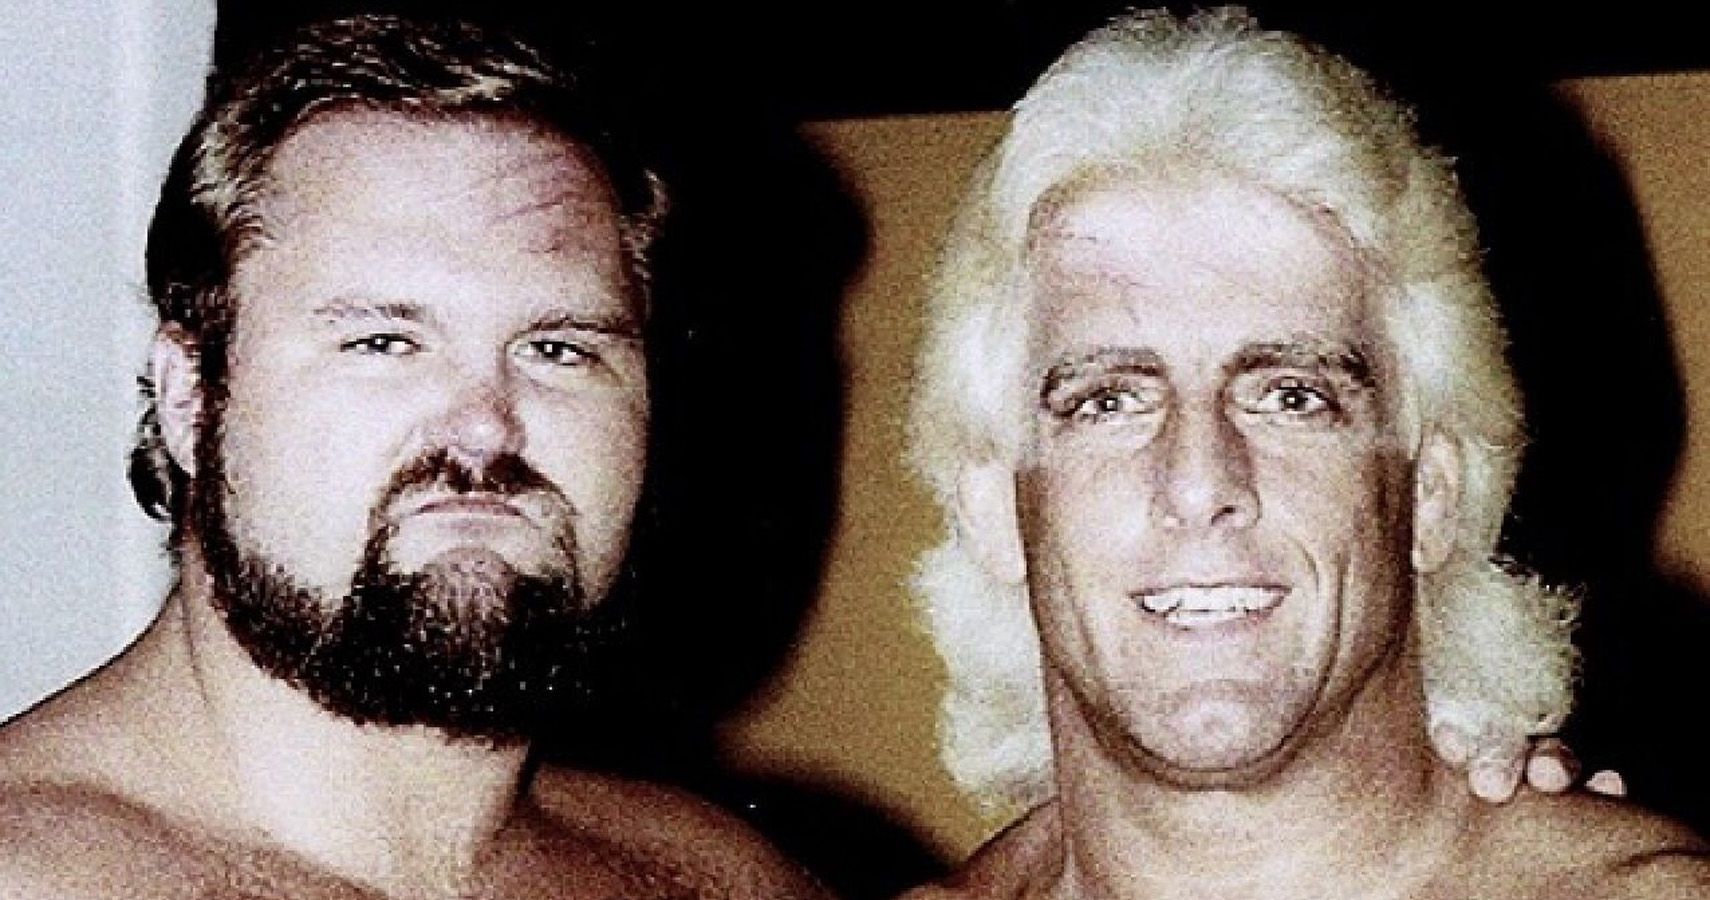 Ric Flair and Arn Anderson